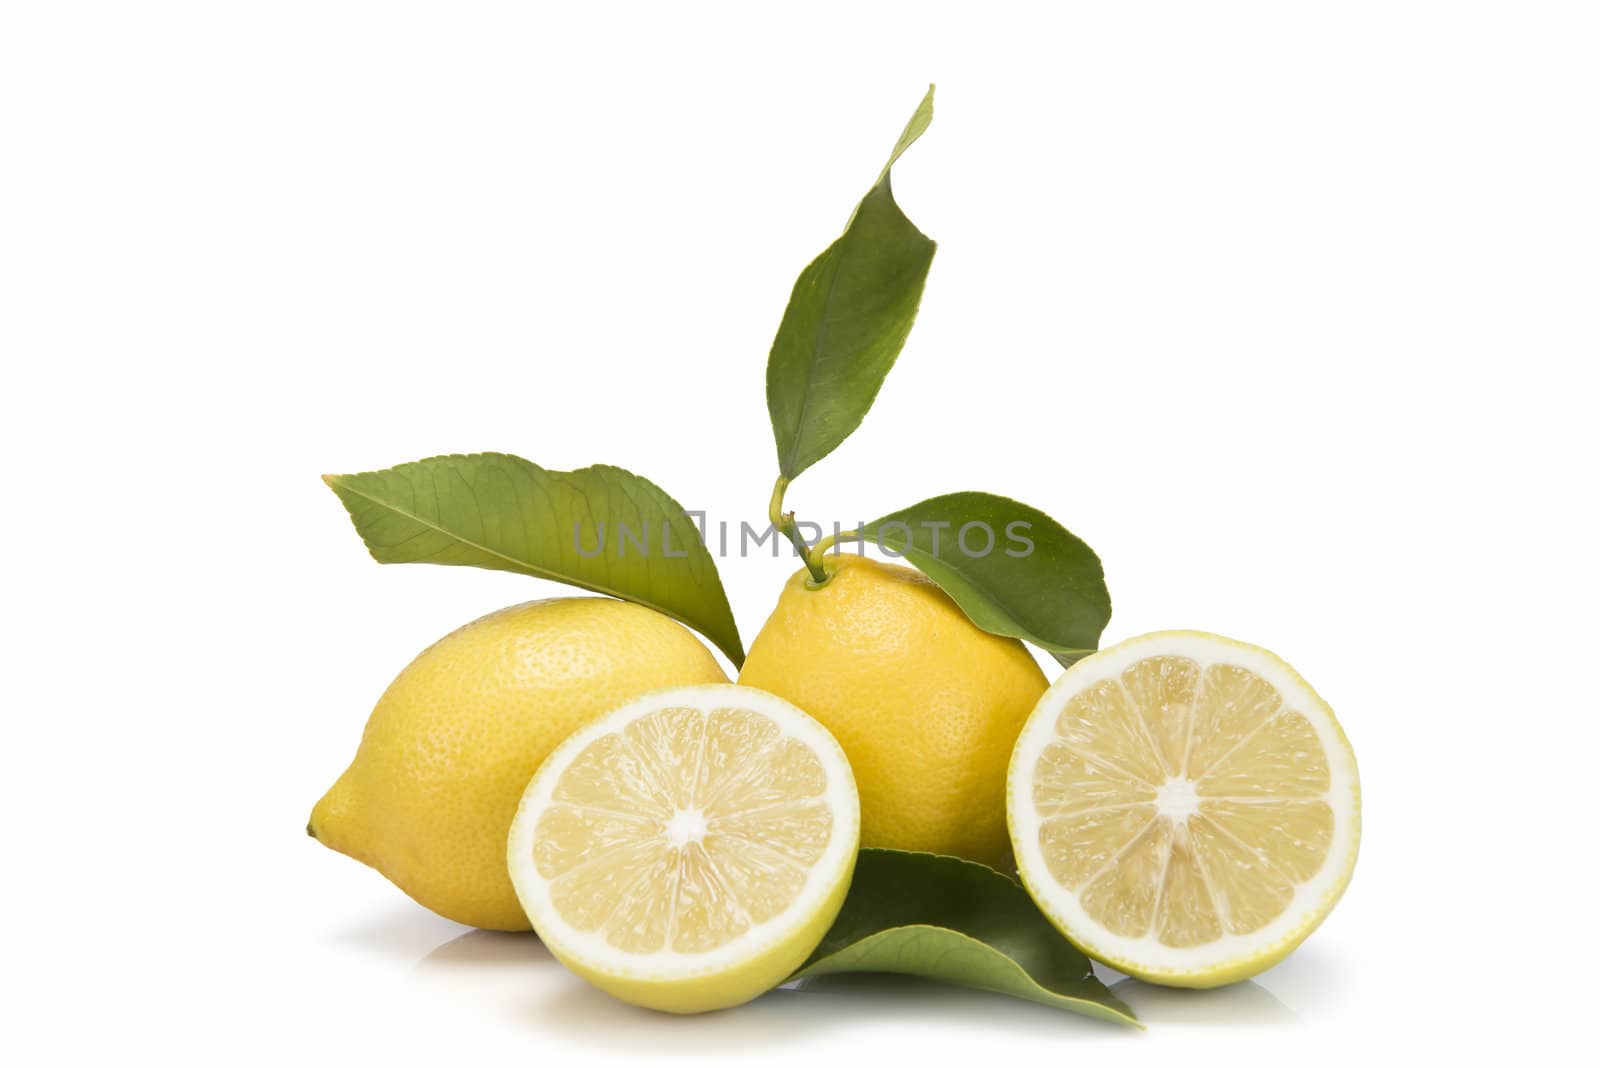 Fresh lemons with leaves by angelsimon